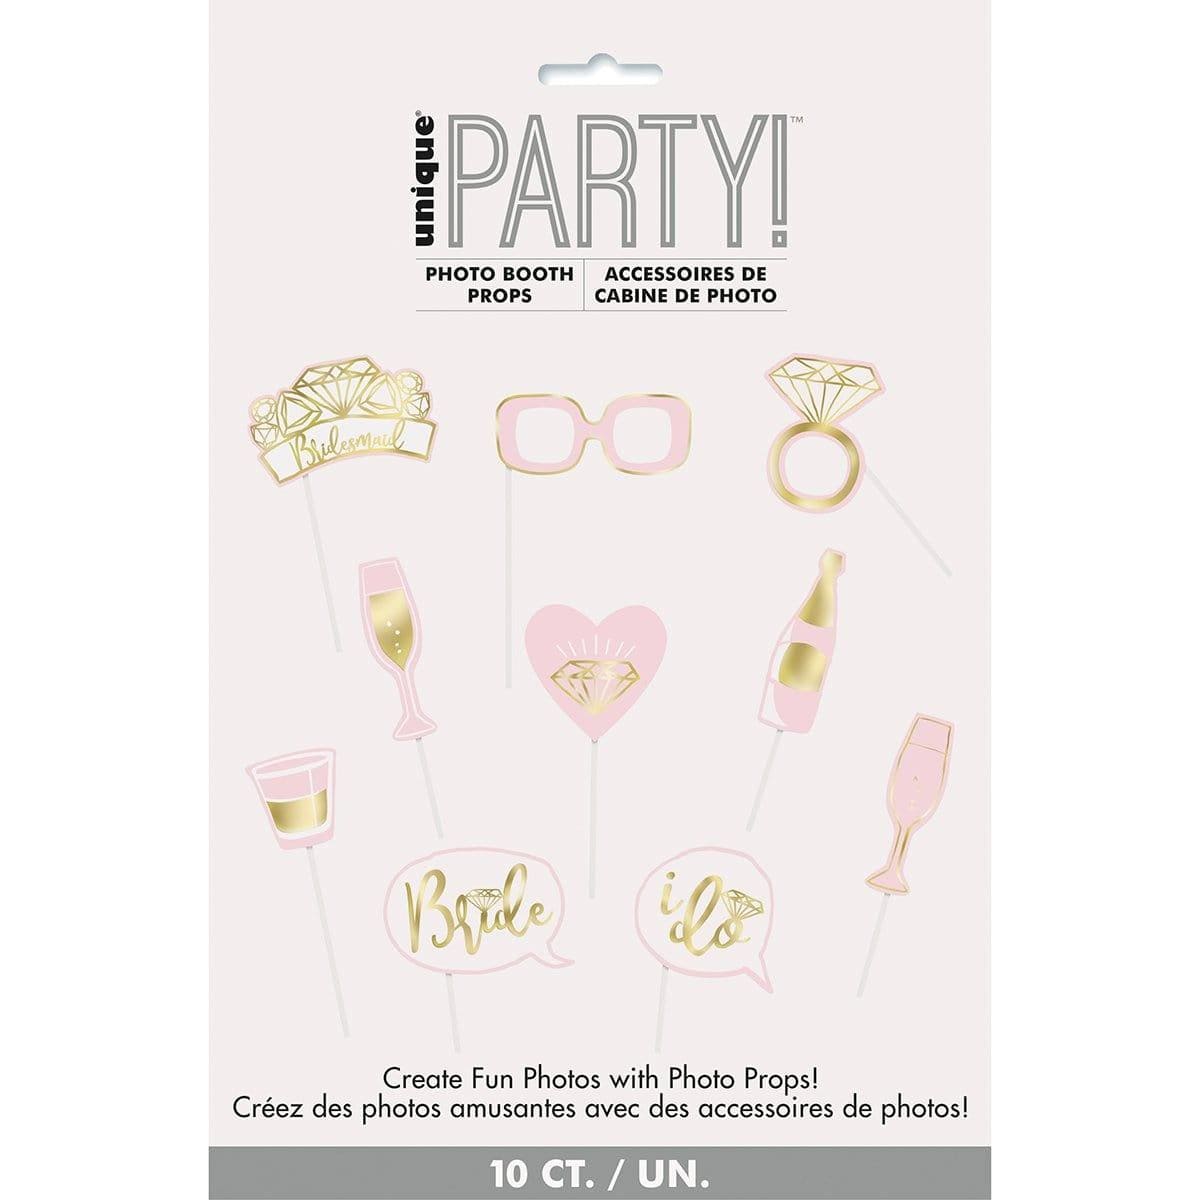 Buy Bachelorette Bride photo booth props, 10 per package sold at Party Expert